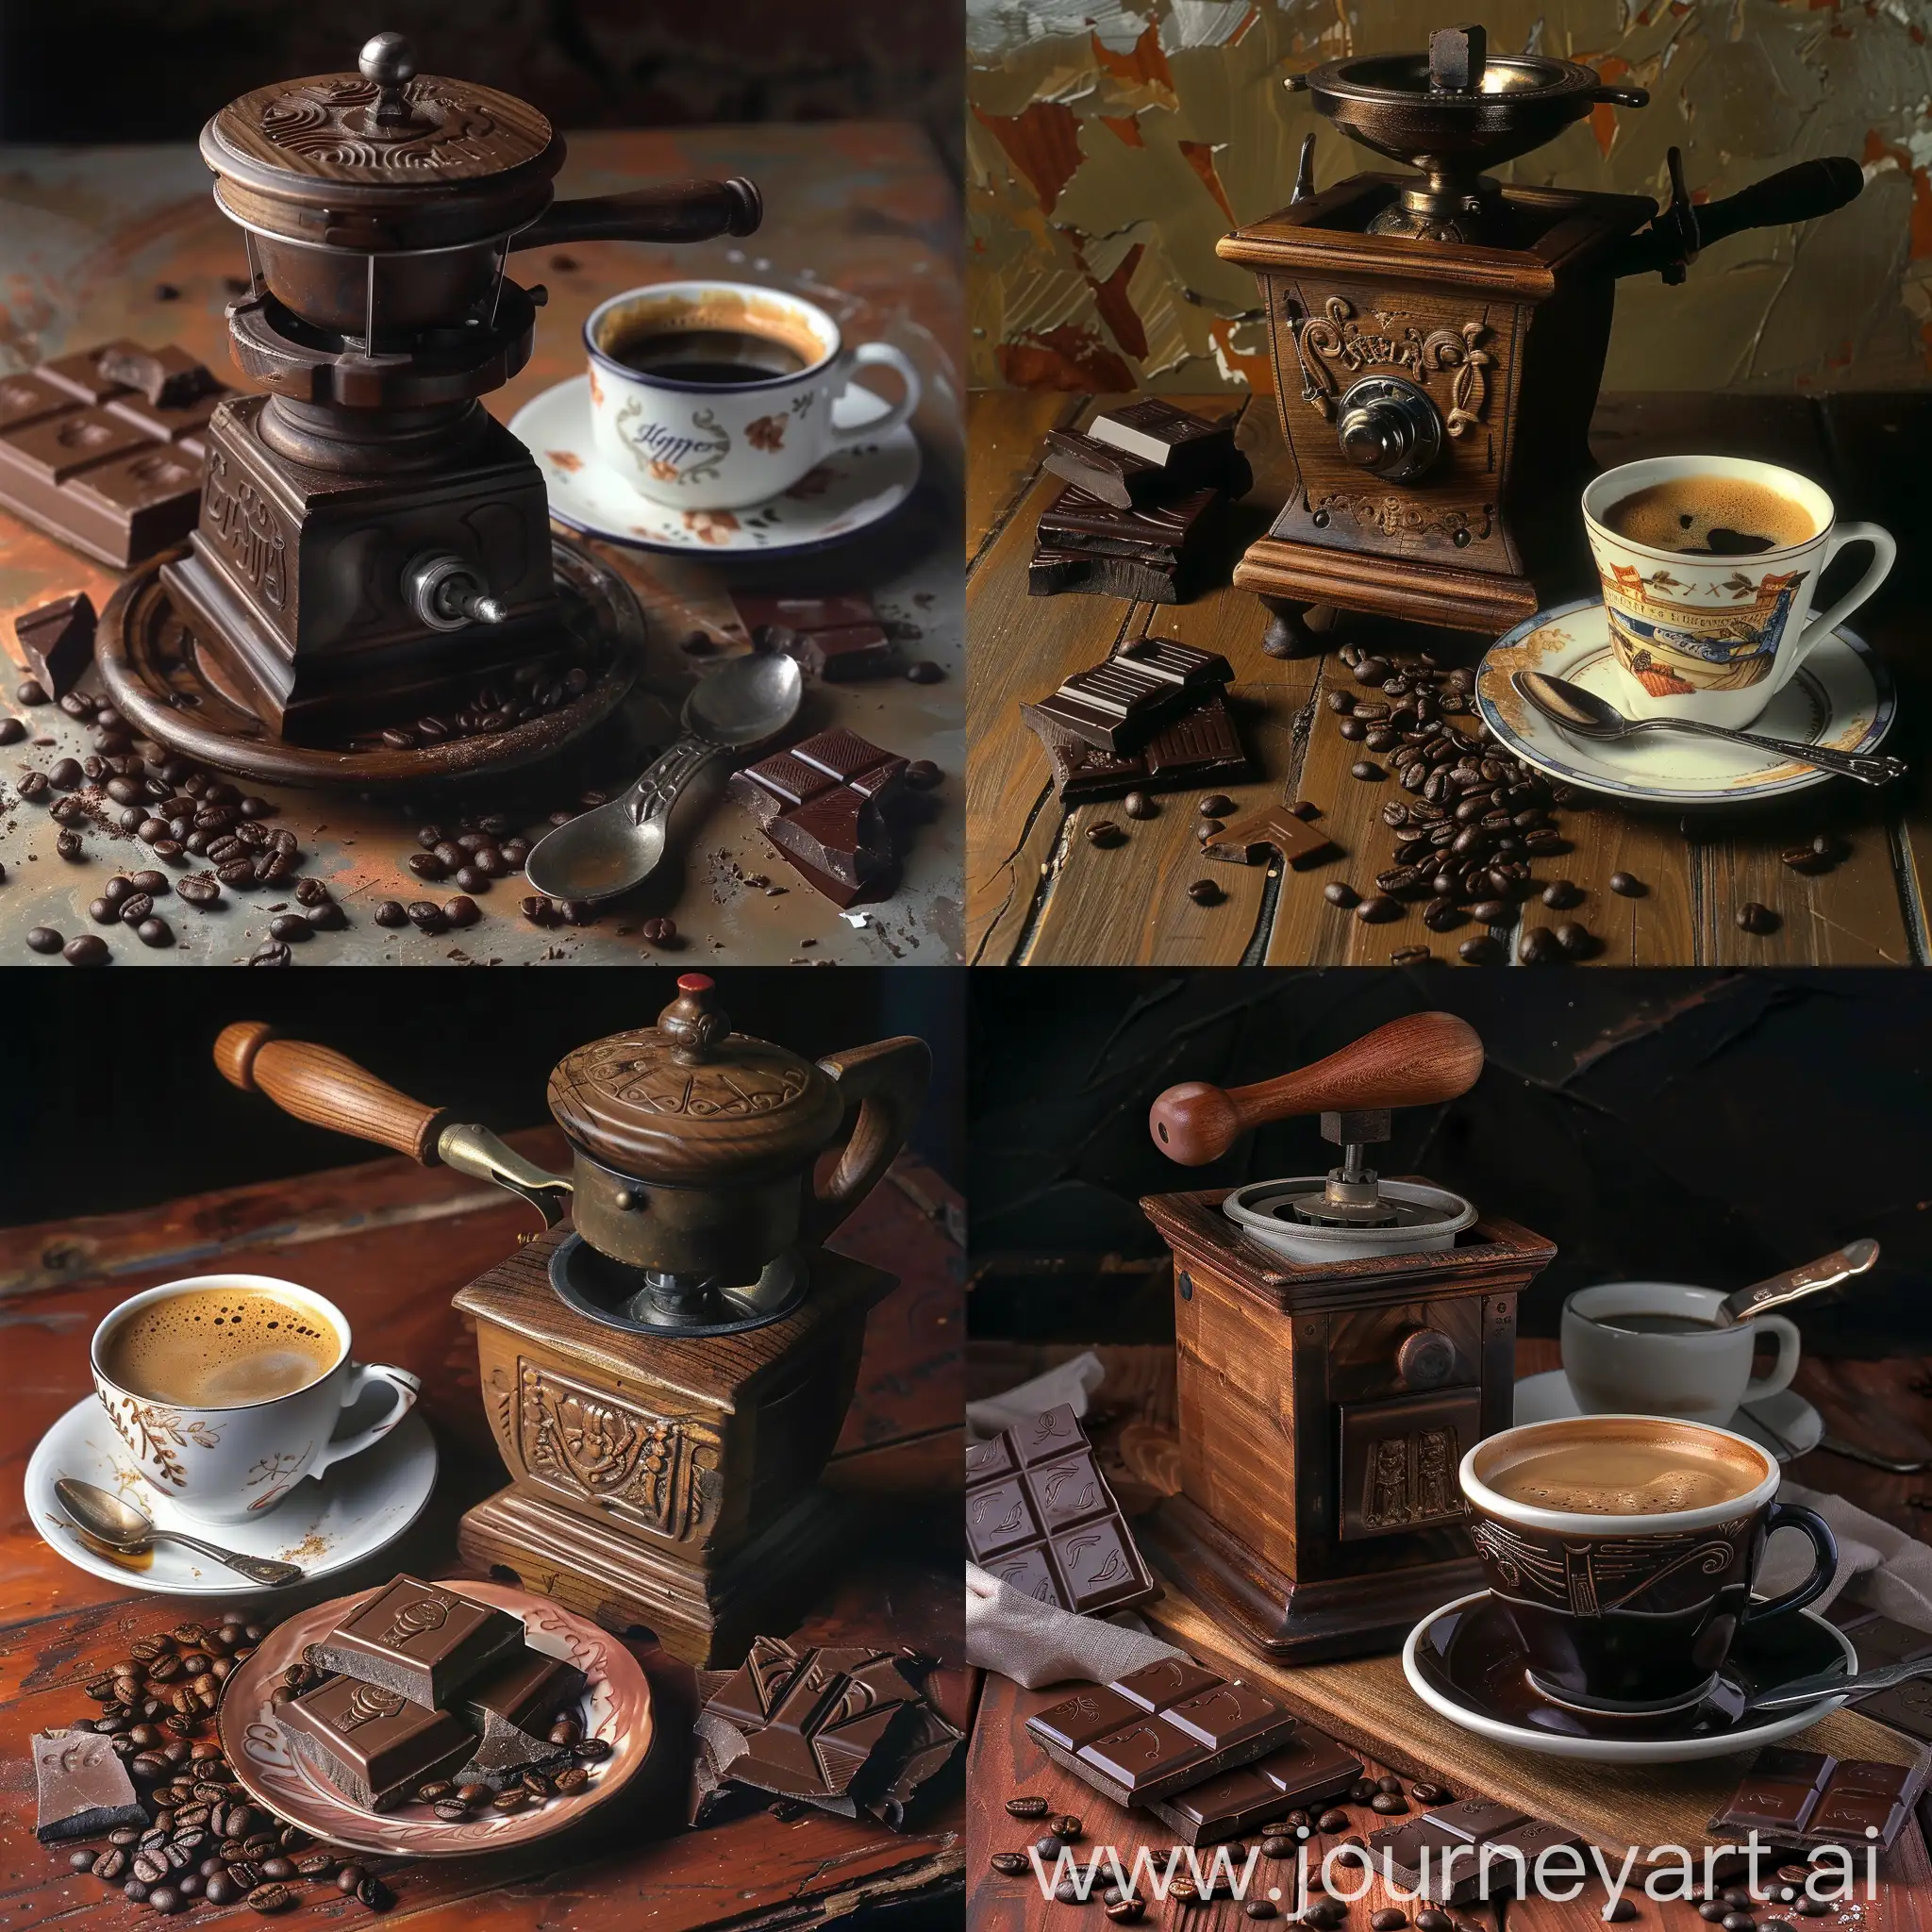 Vintage-Coffee-Grinder-and-Artisanal-Coffee-Setting-with-Chocolate-and-Beans